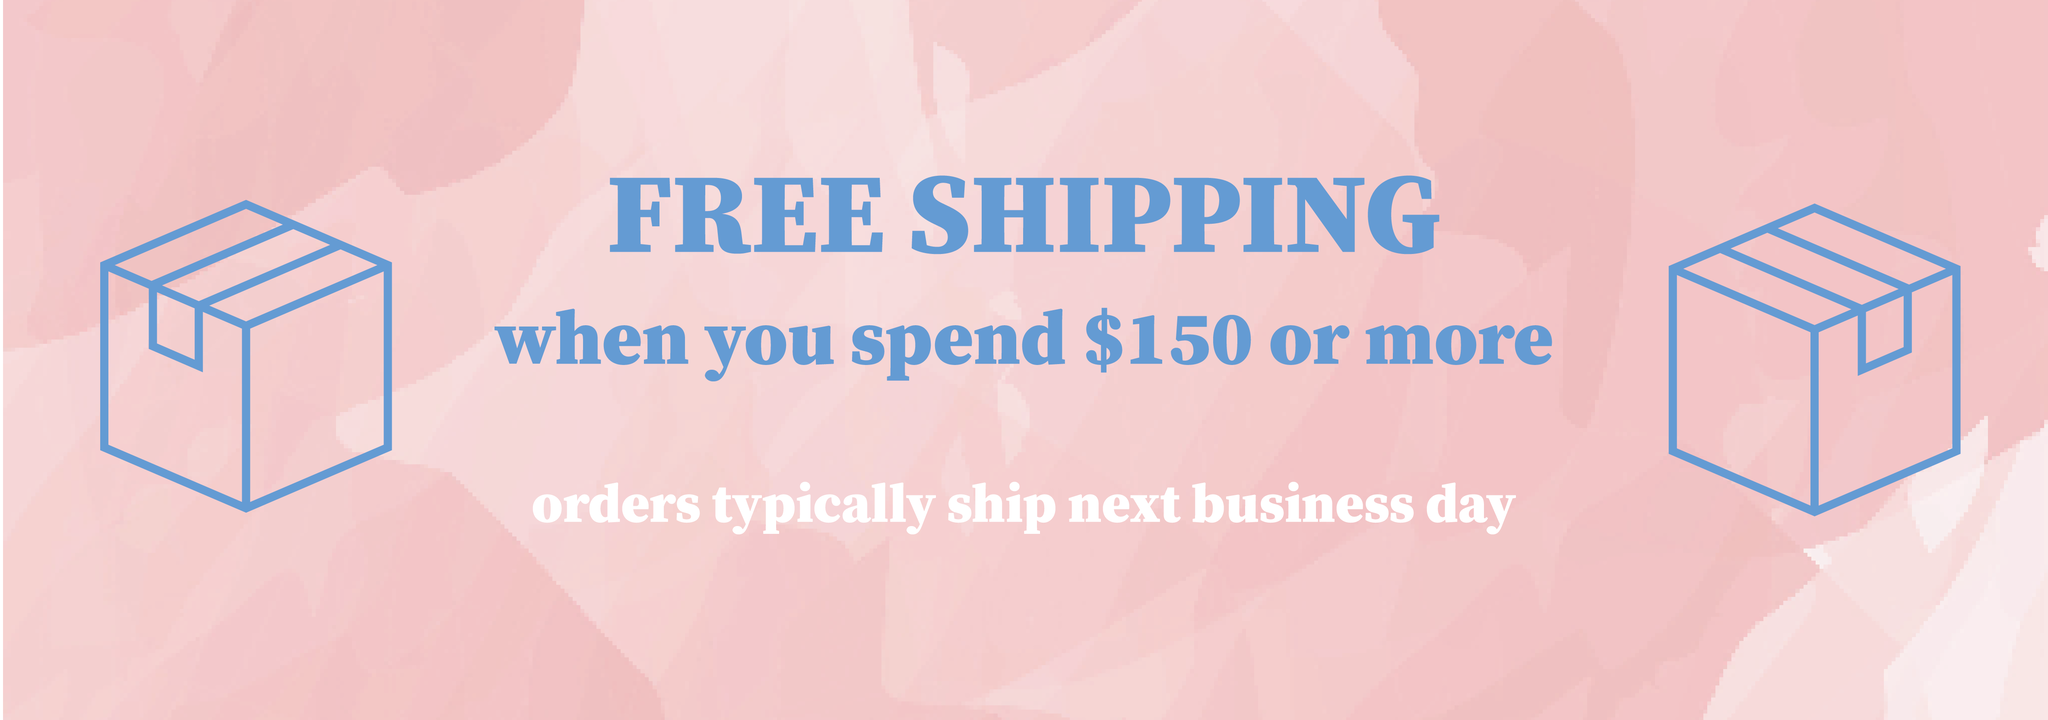 free shipping over $150